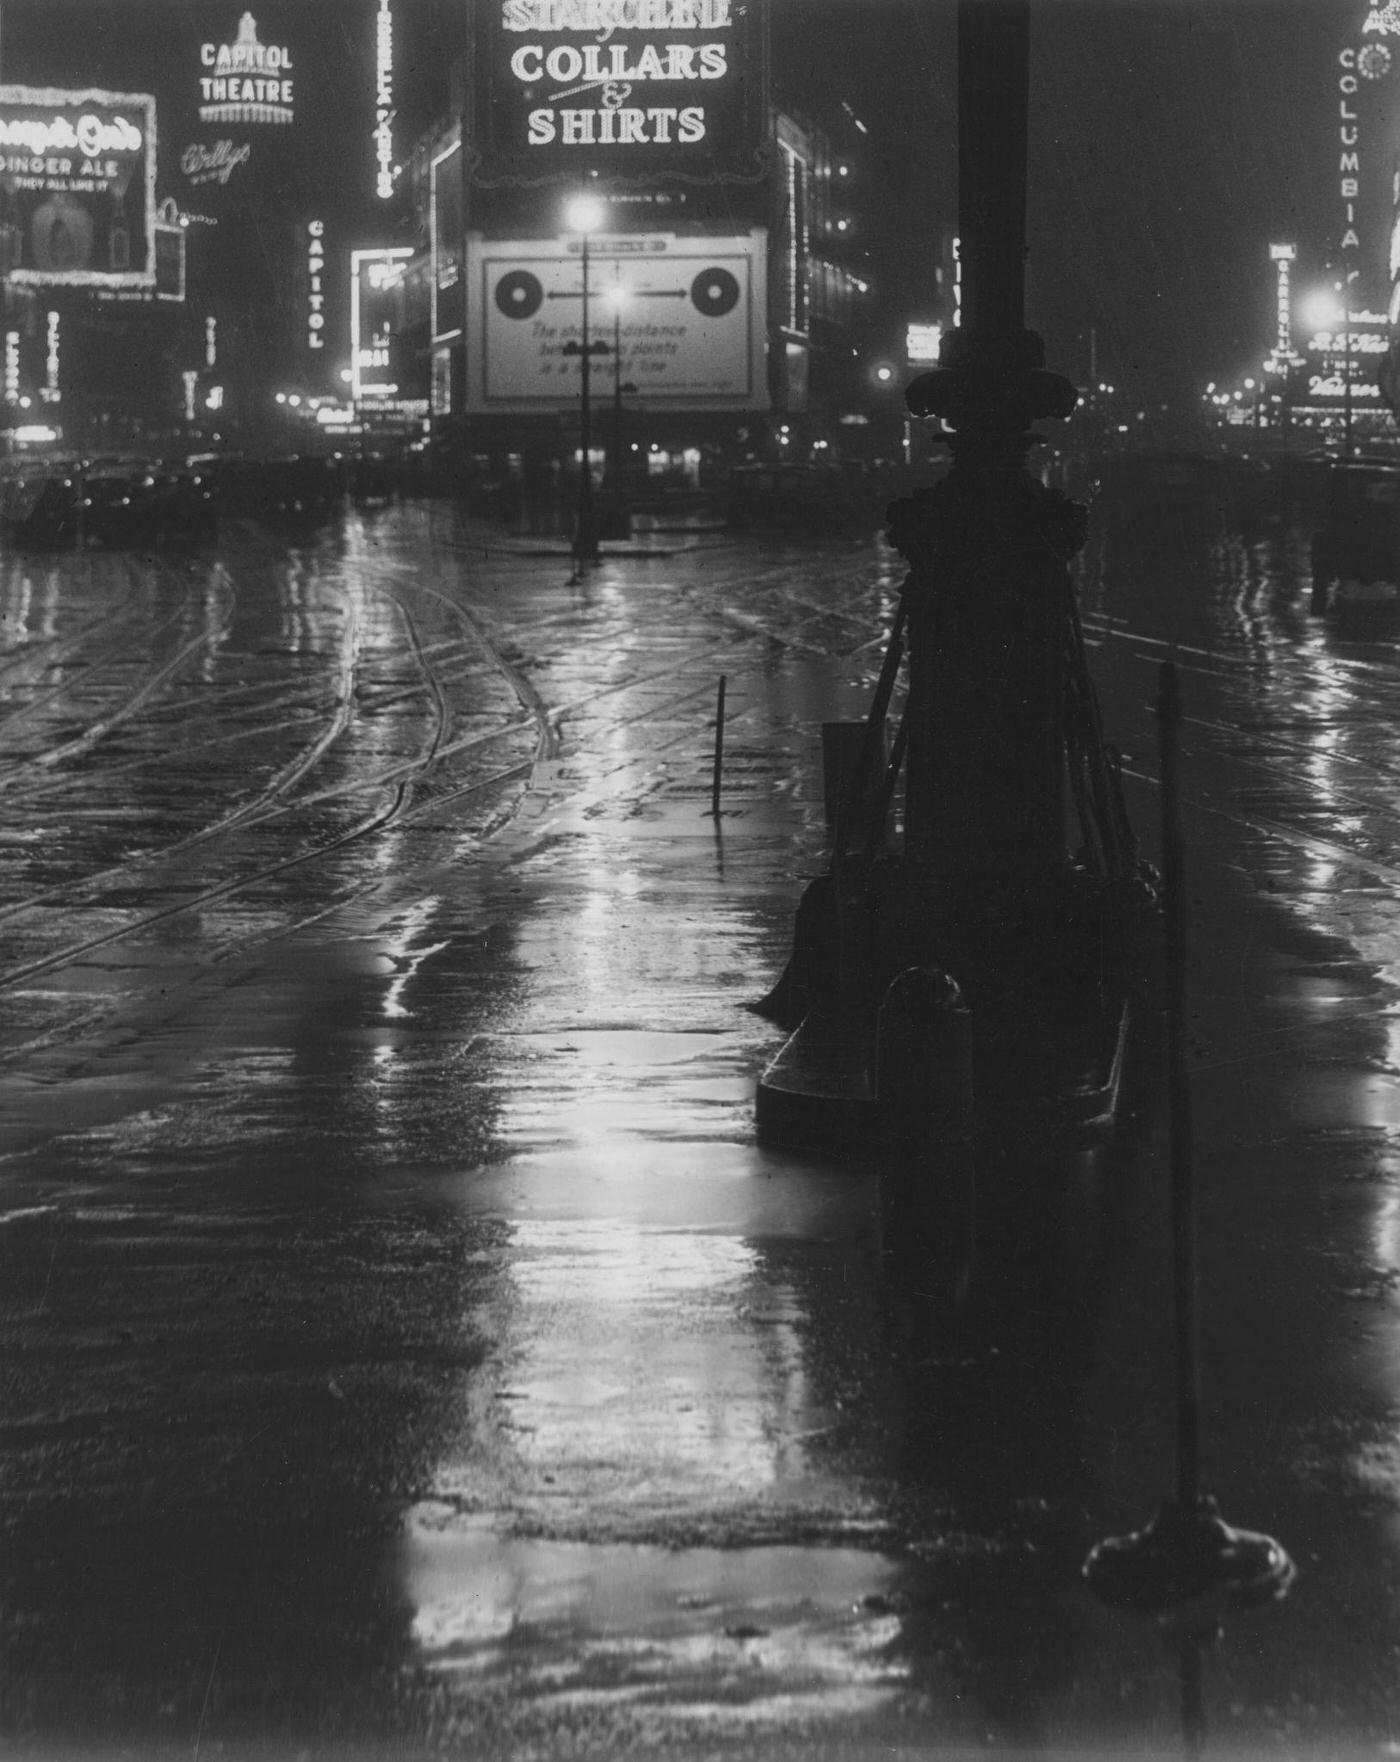 Rainy Night, View Down Towards Street At Broadway And Times Square, Manhattan, 1929